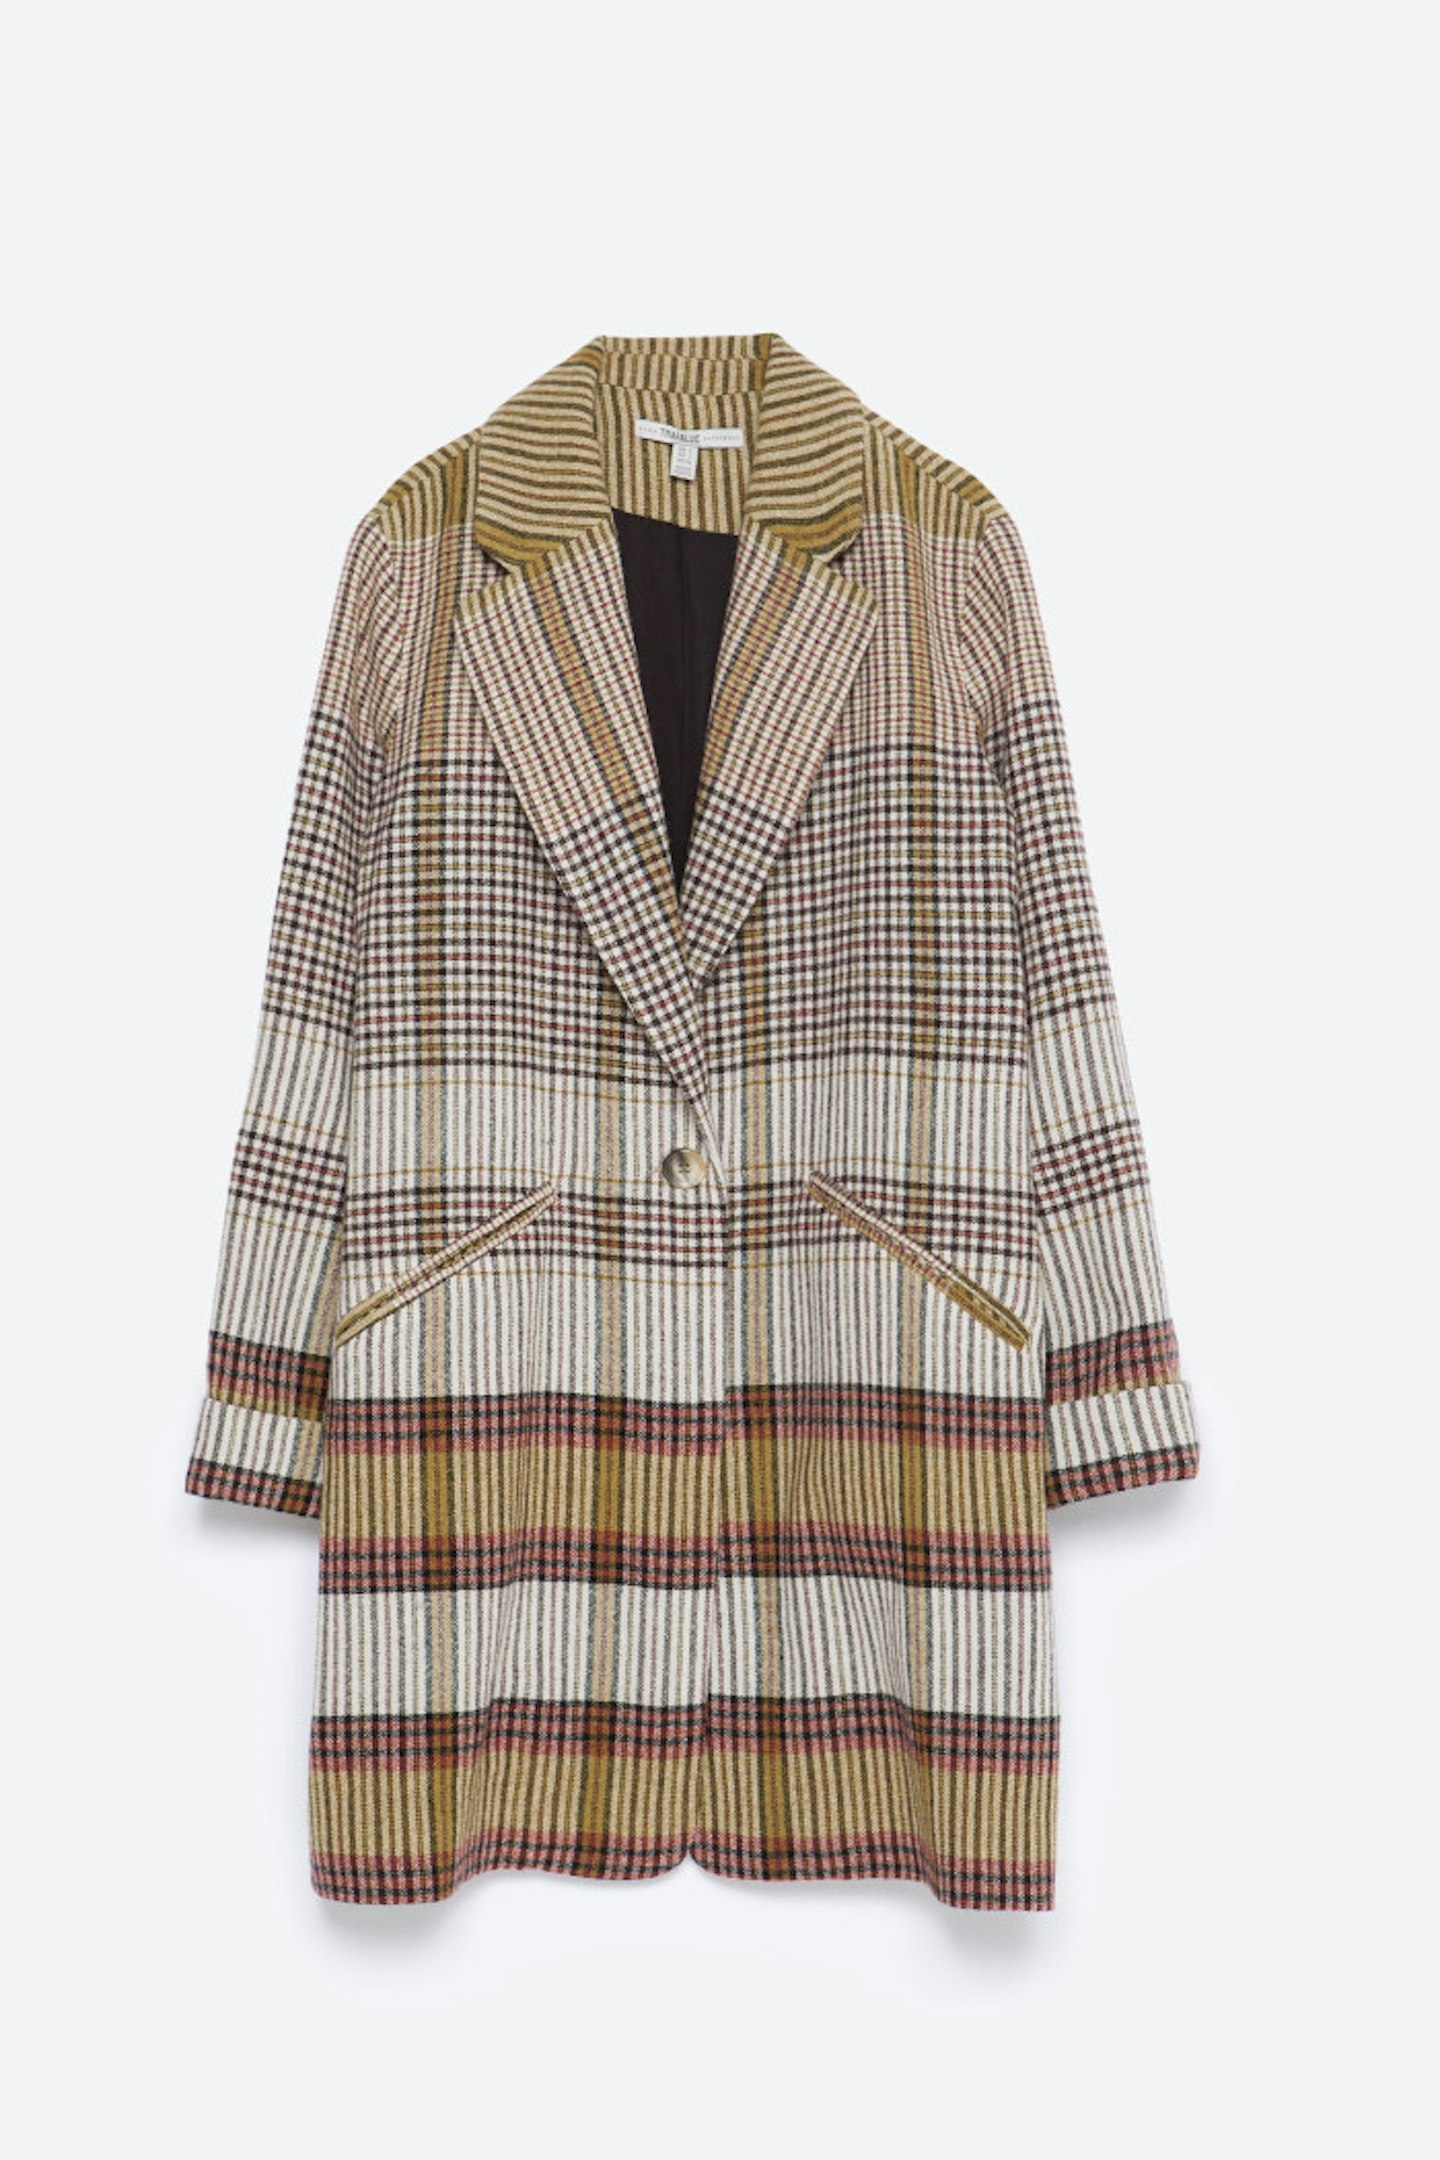 We love the Autumnal colours on this coat from Zara - a great transitional piece for right now.